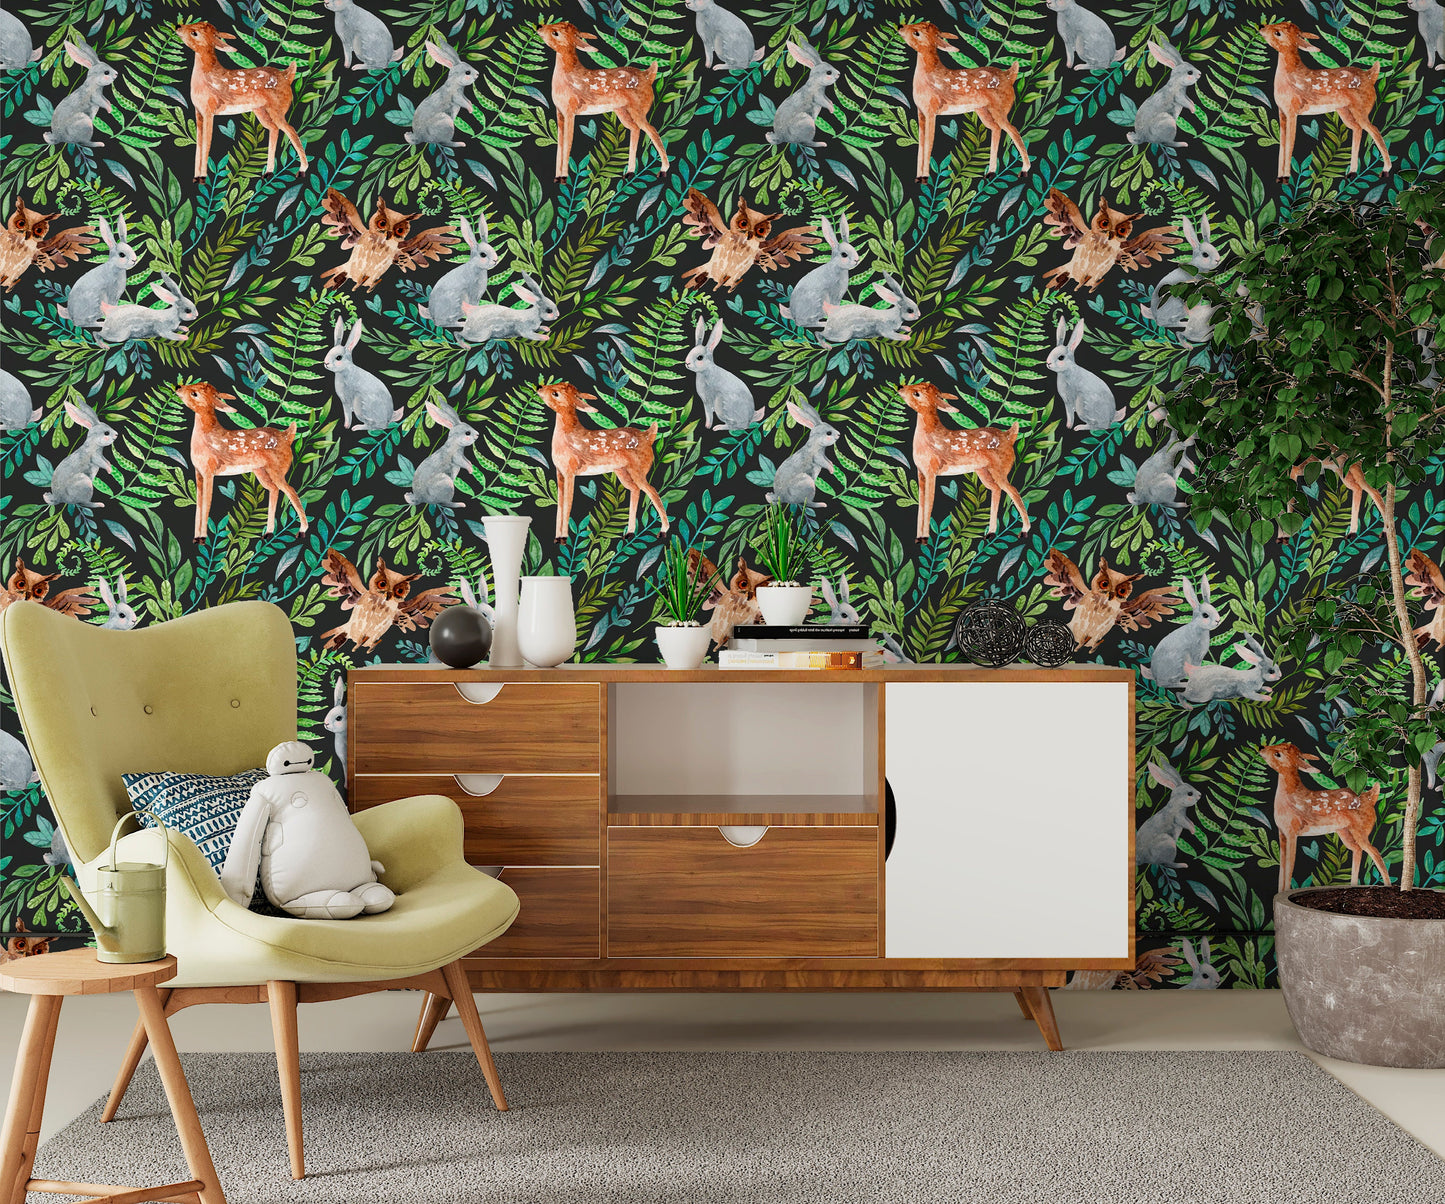 Forest Animal Wallpaper Peel and Stick, Woodland Wallpaper, Dark Rabbit Wallpaper, Owl Wallpaper, Removable Wall Paper